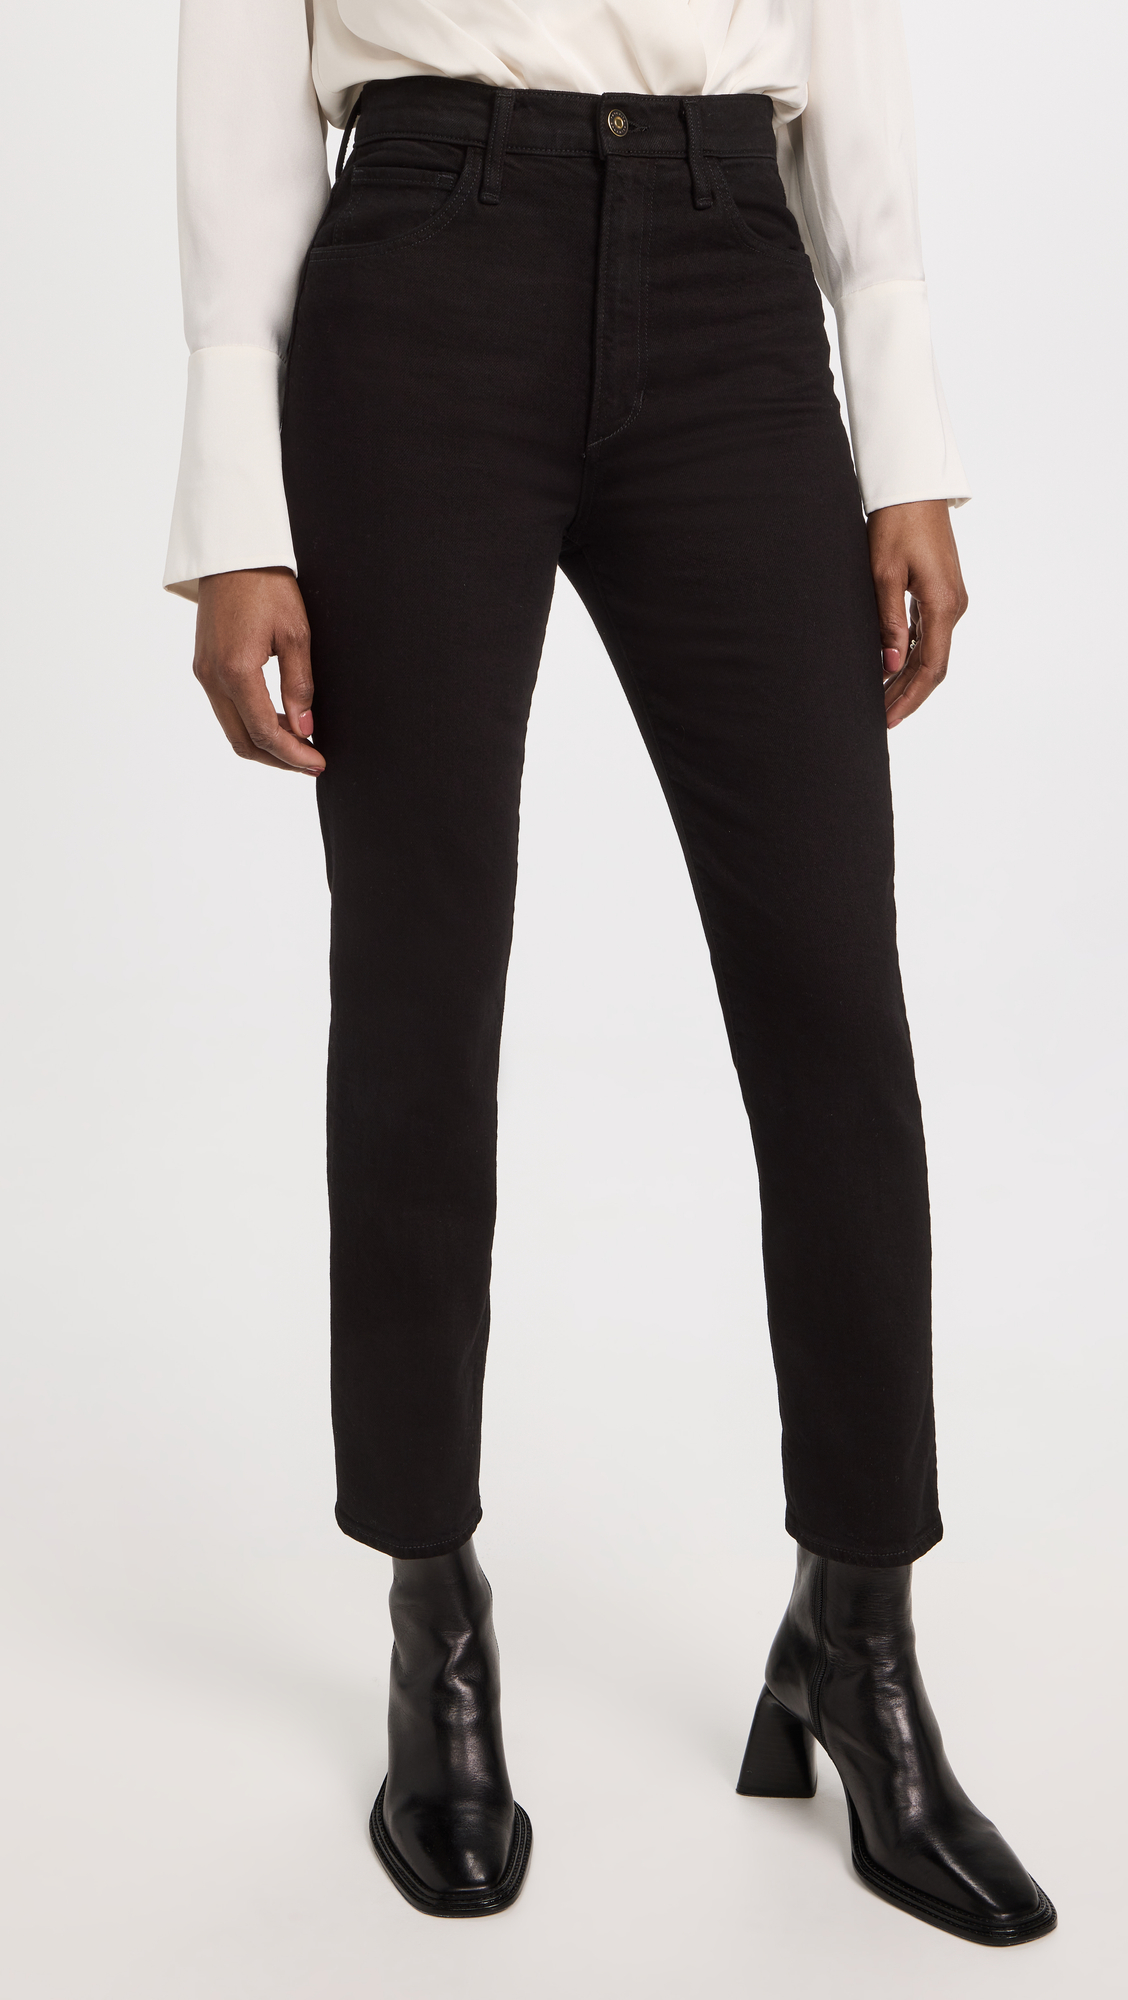 The 29 Best Black Jeans for Women Based on Reviews | Who What Wear